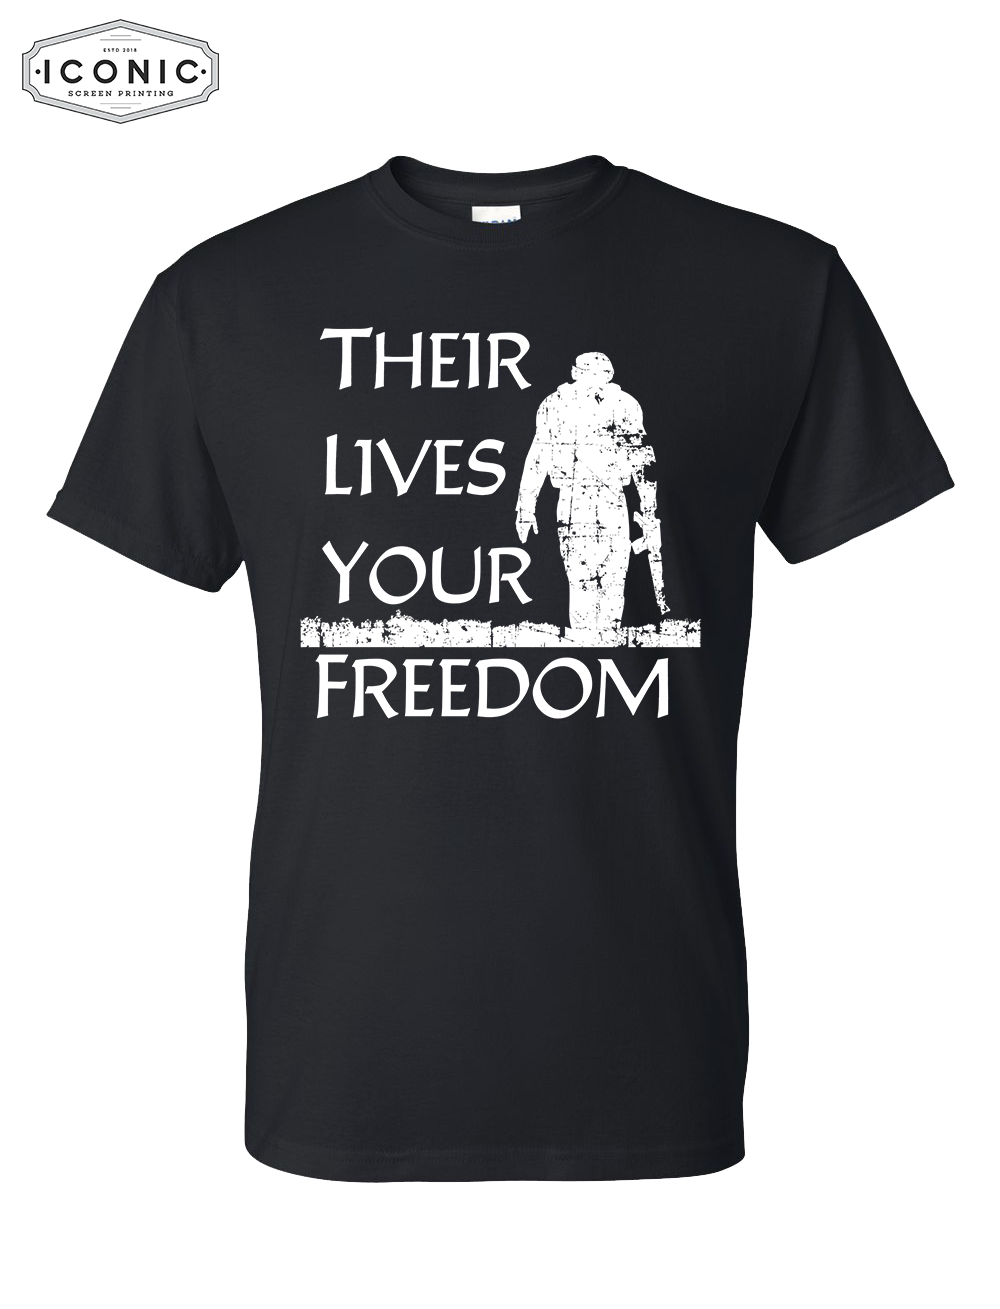 Their Lives Your Freedom - DryBlend T-Shirt